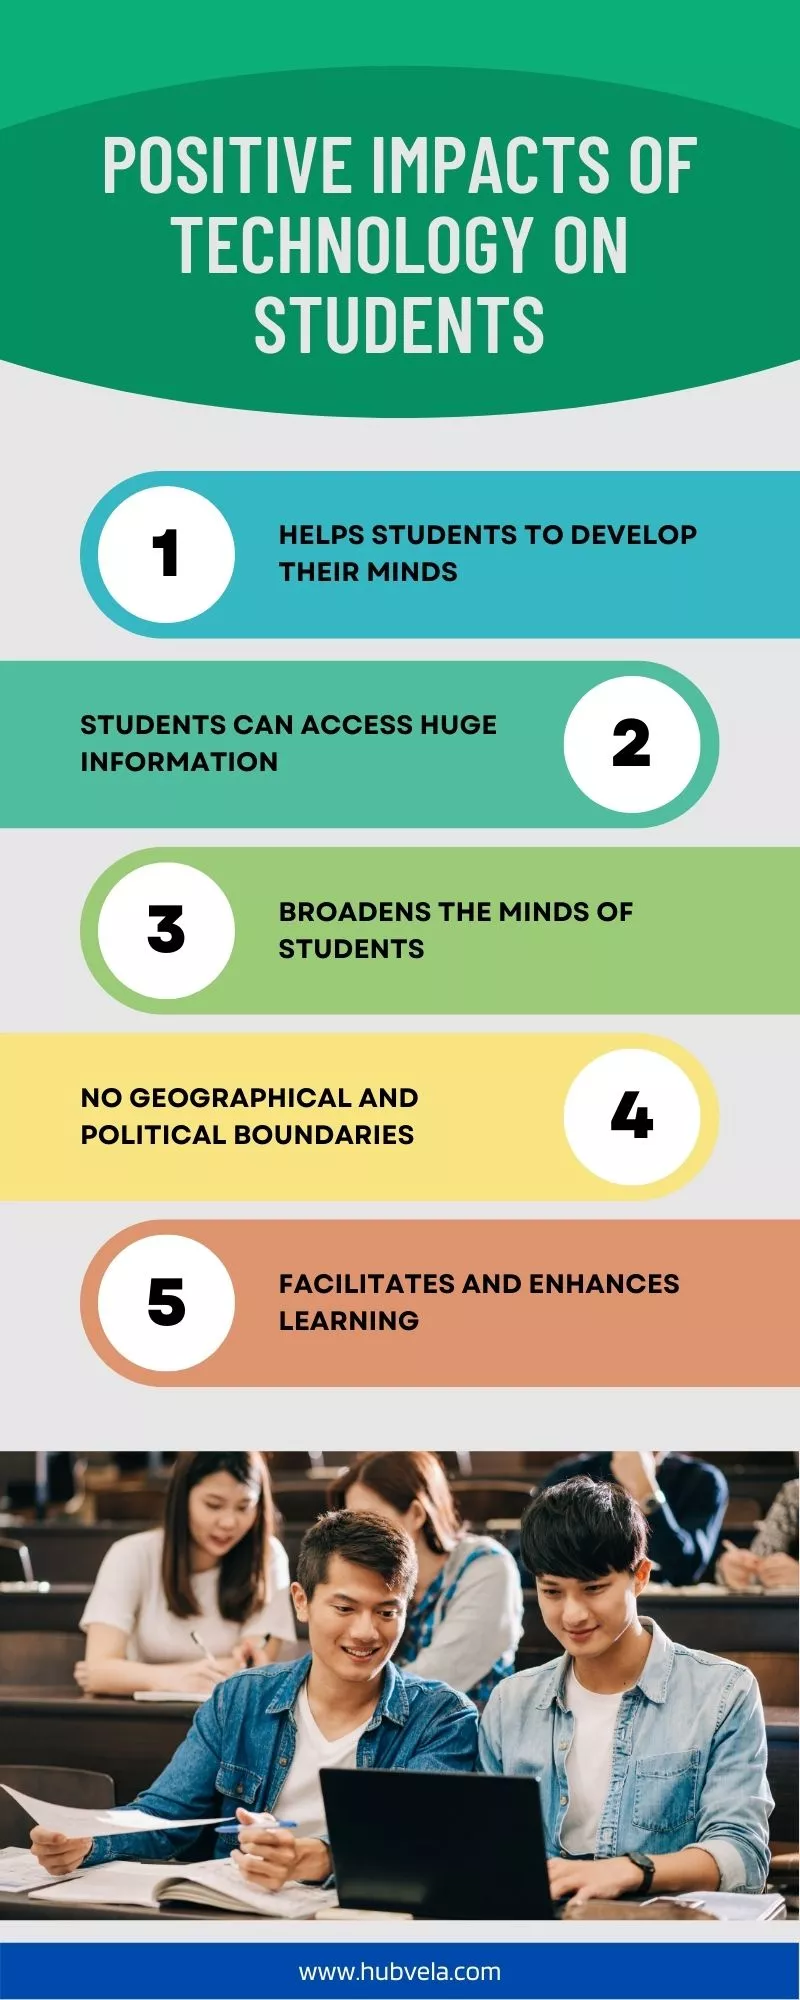 Positive Impacts of Technology on Students infographic